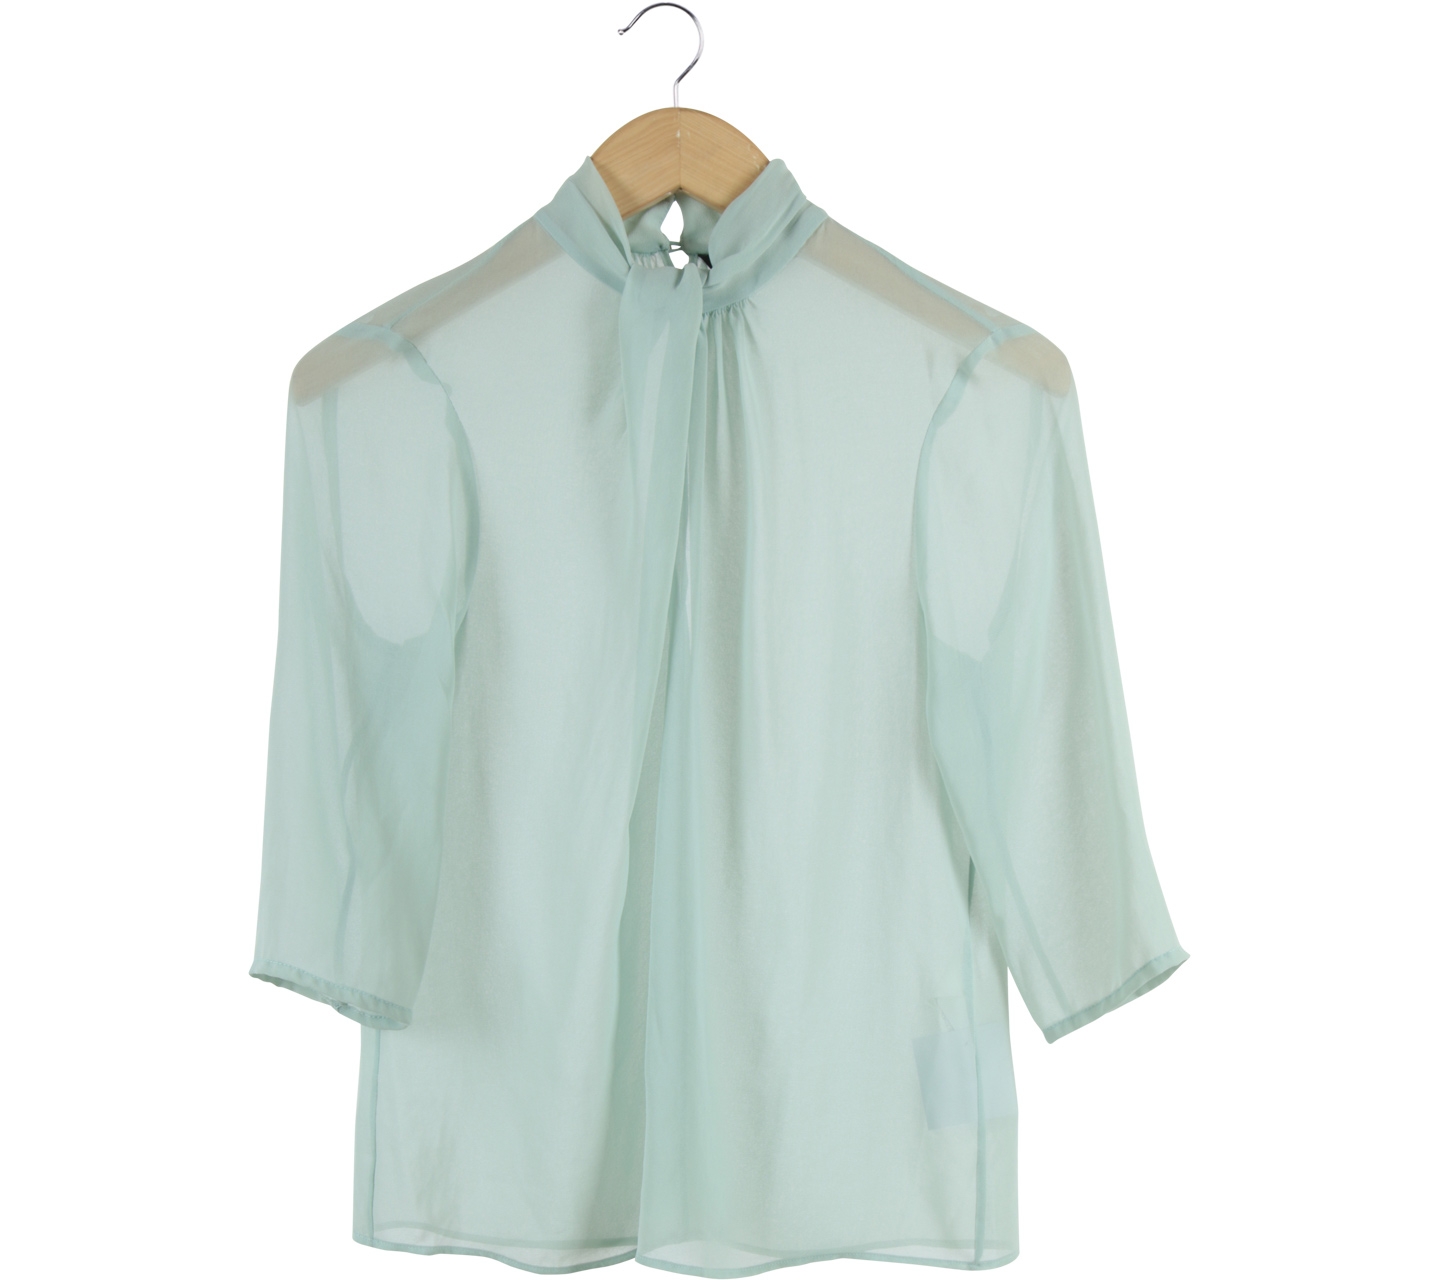 Zara Turquoise Back Cut Out Blouse